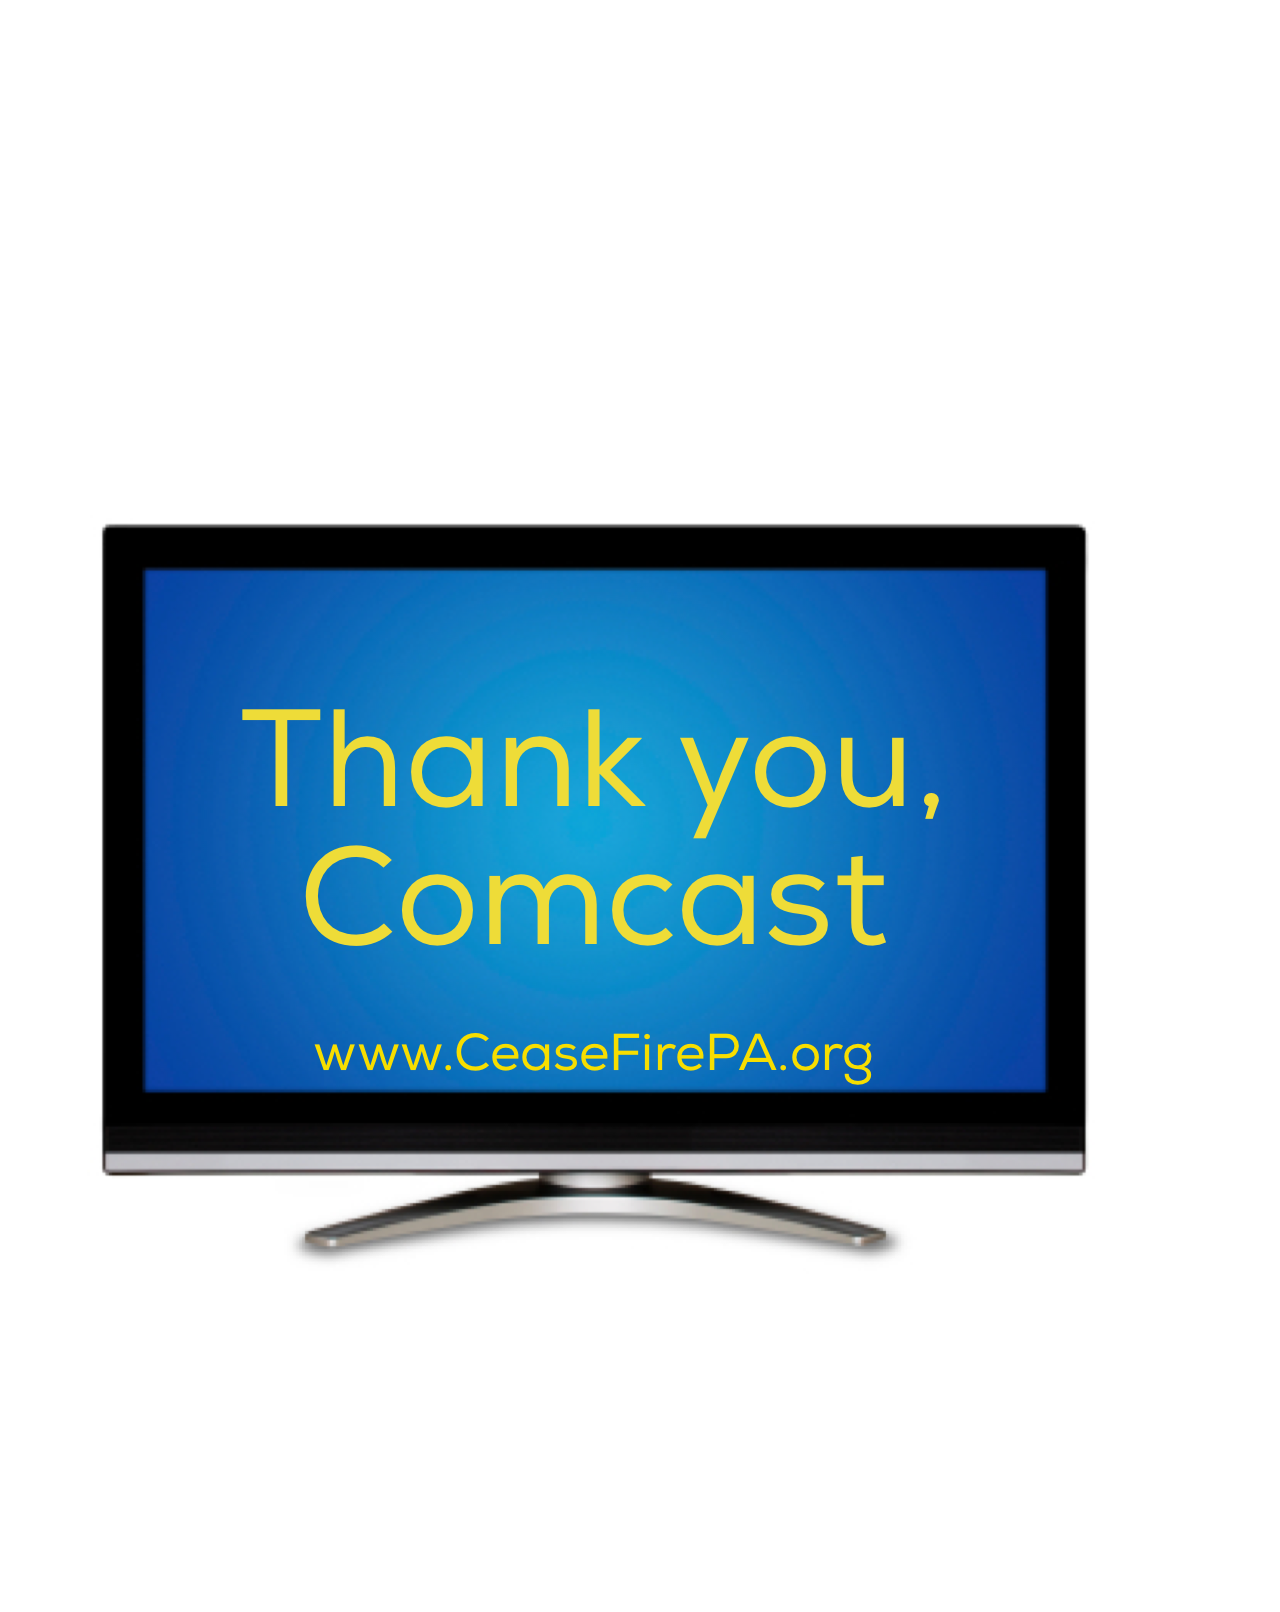 Why Are We Asking You to Thank a Cable Company?